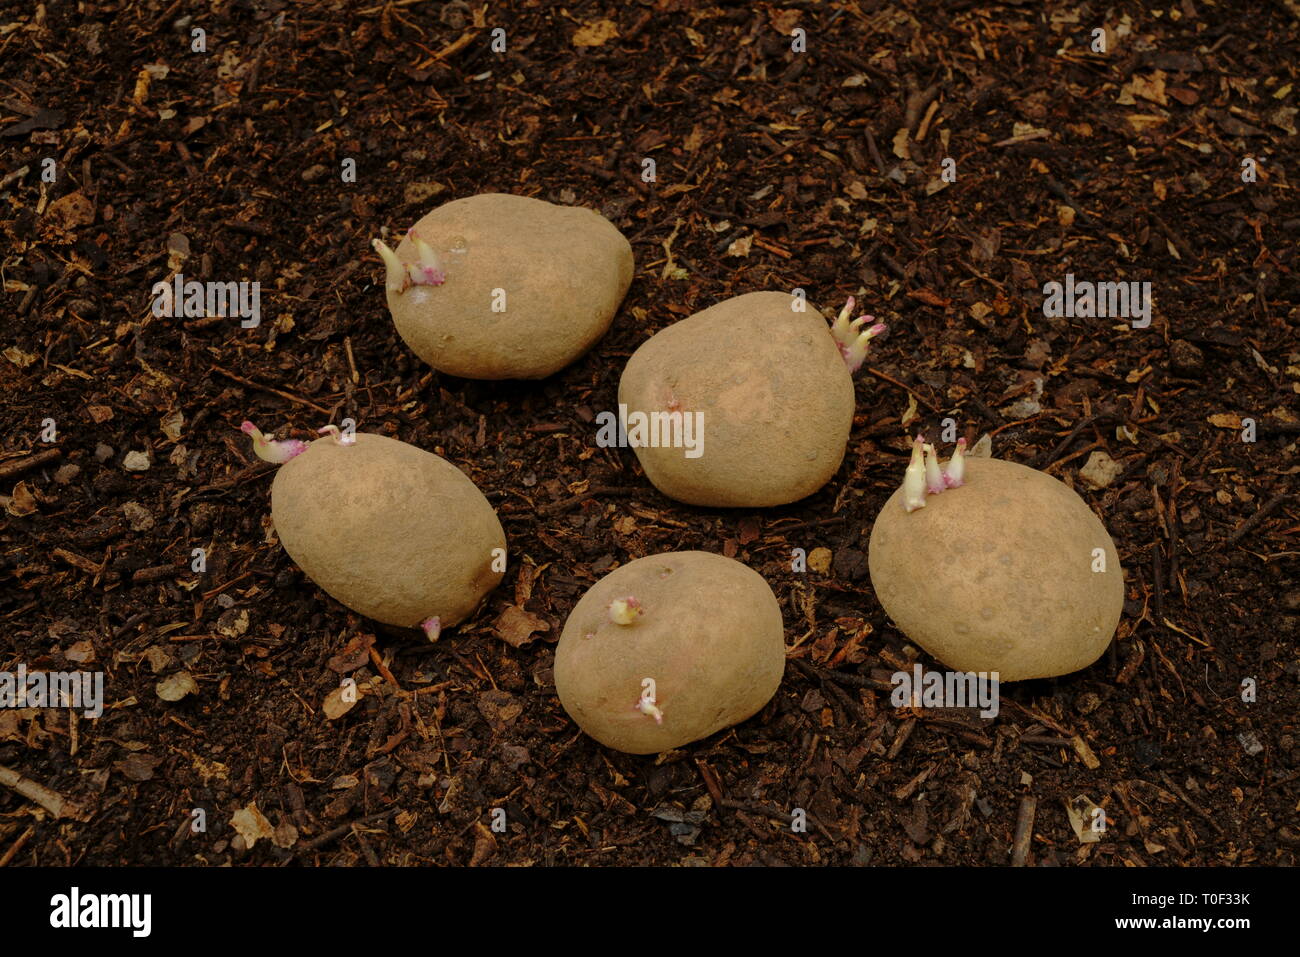 King Edward seed potatoes chitted ready for planting. Stock Photo